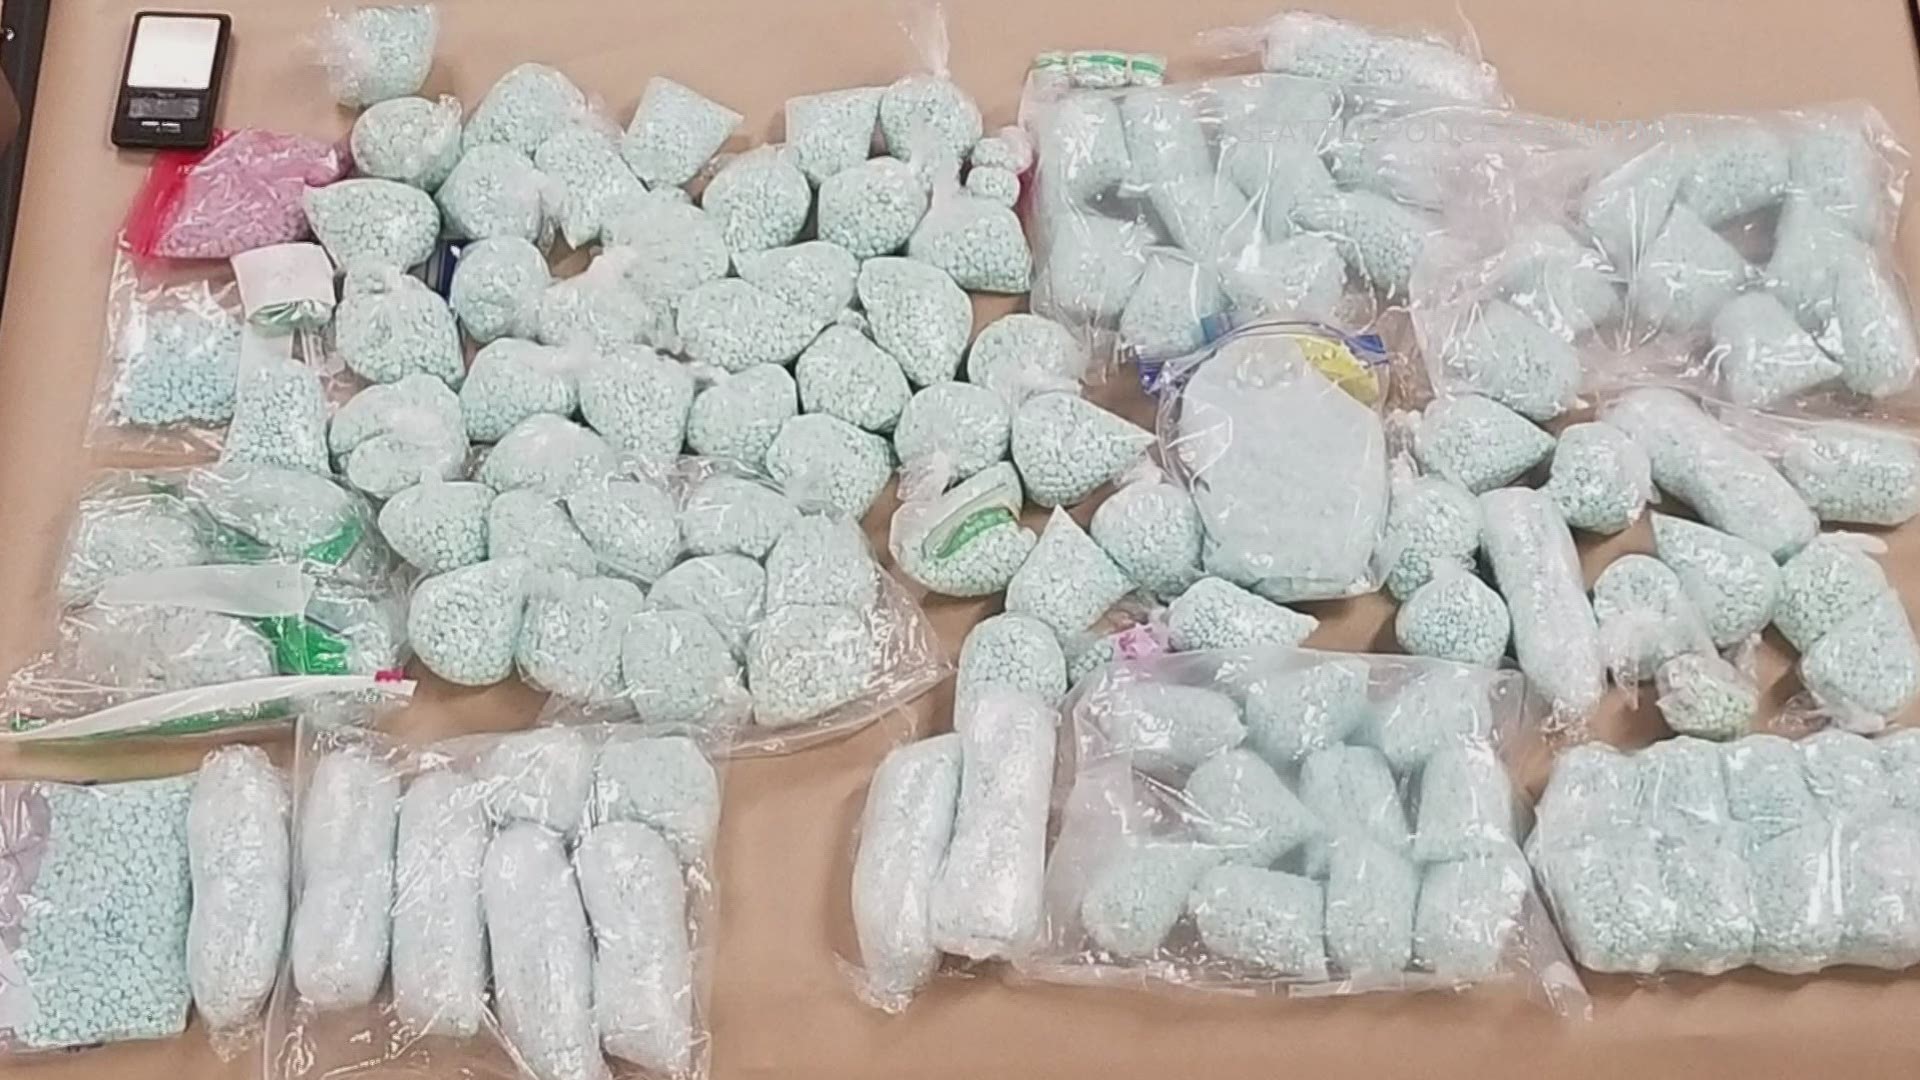 SPD seized 410,000 counterfeit oxycodone pills, which contained fentanyl, 77 pounds of meth, 908 grams of heroin, 787 grams of cocaine, guns and nearly $250,000.